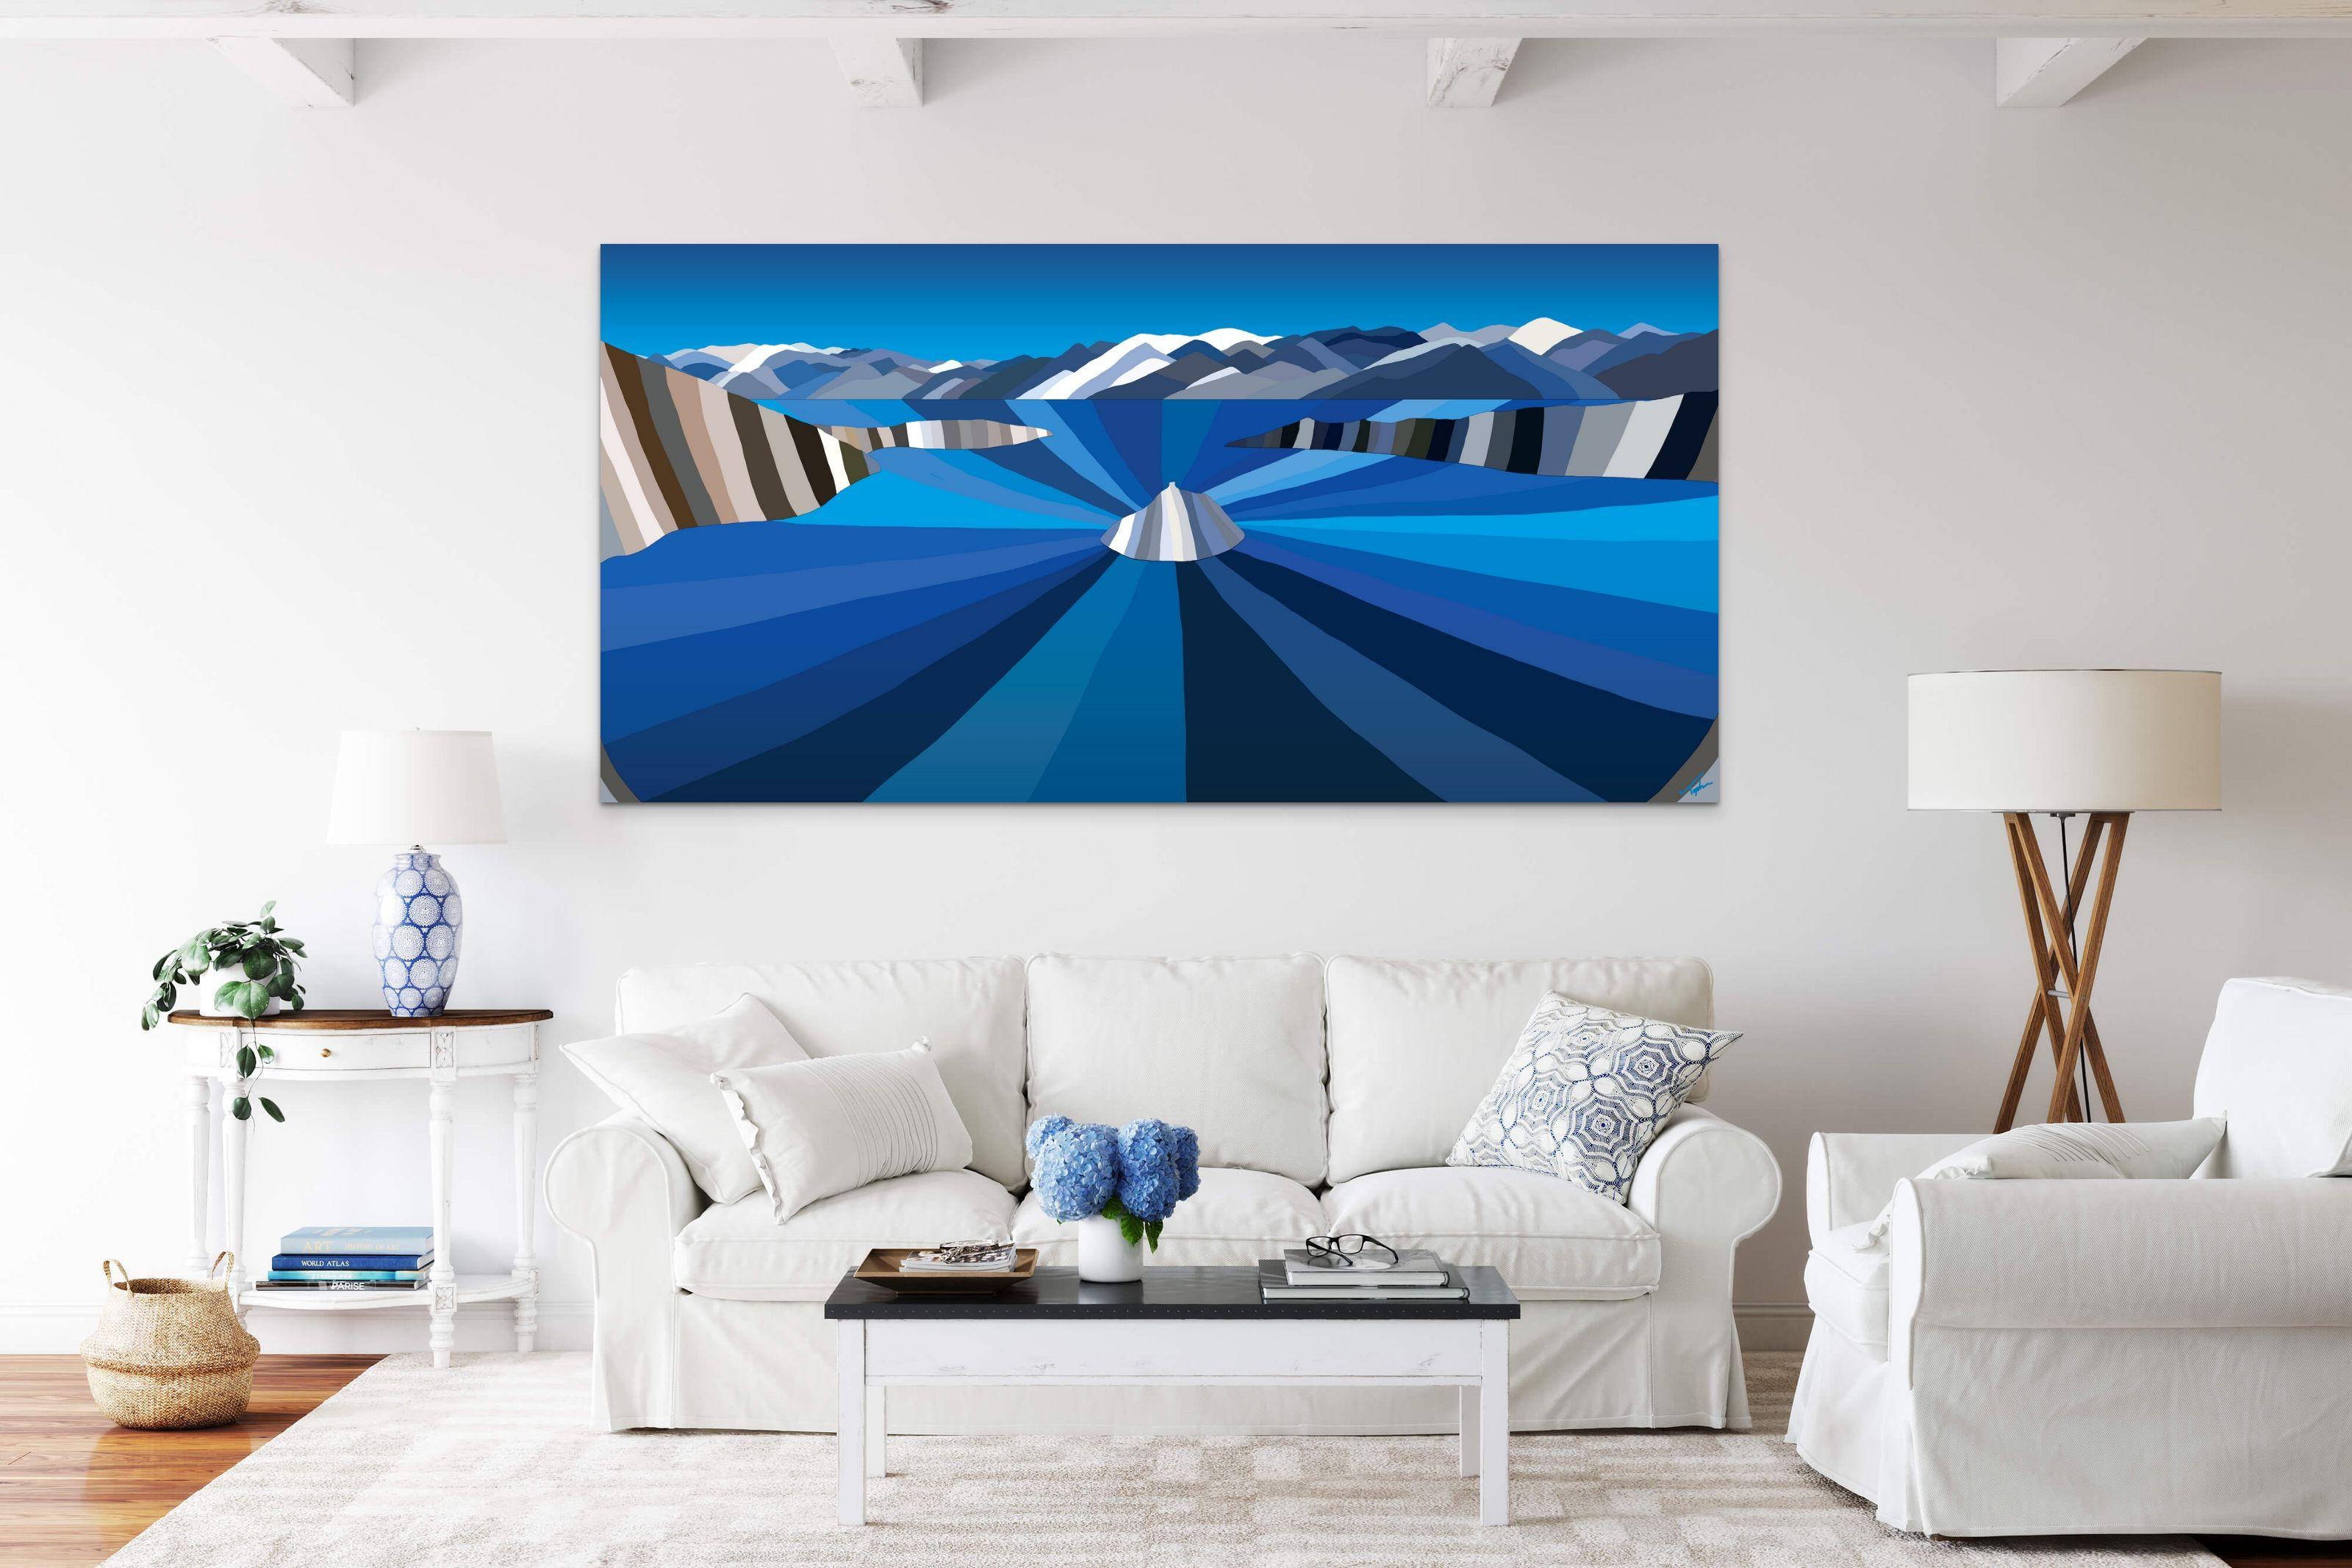 This original modern landscape painting of Lake Tahoe, is a bold vivid work of contemporary art. The original large-scale digital painting, dye-sublimated onto aluminum by Coloradan artist Topher Straus, takes an original approach to depicting